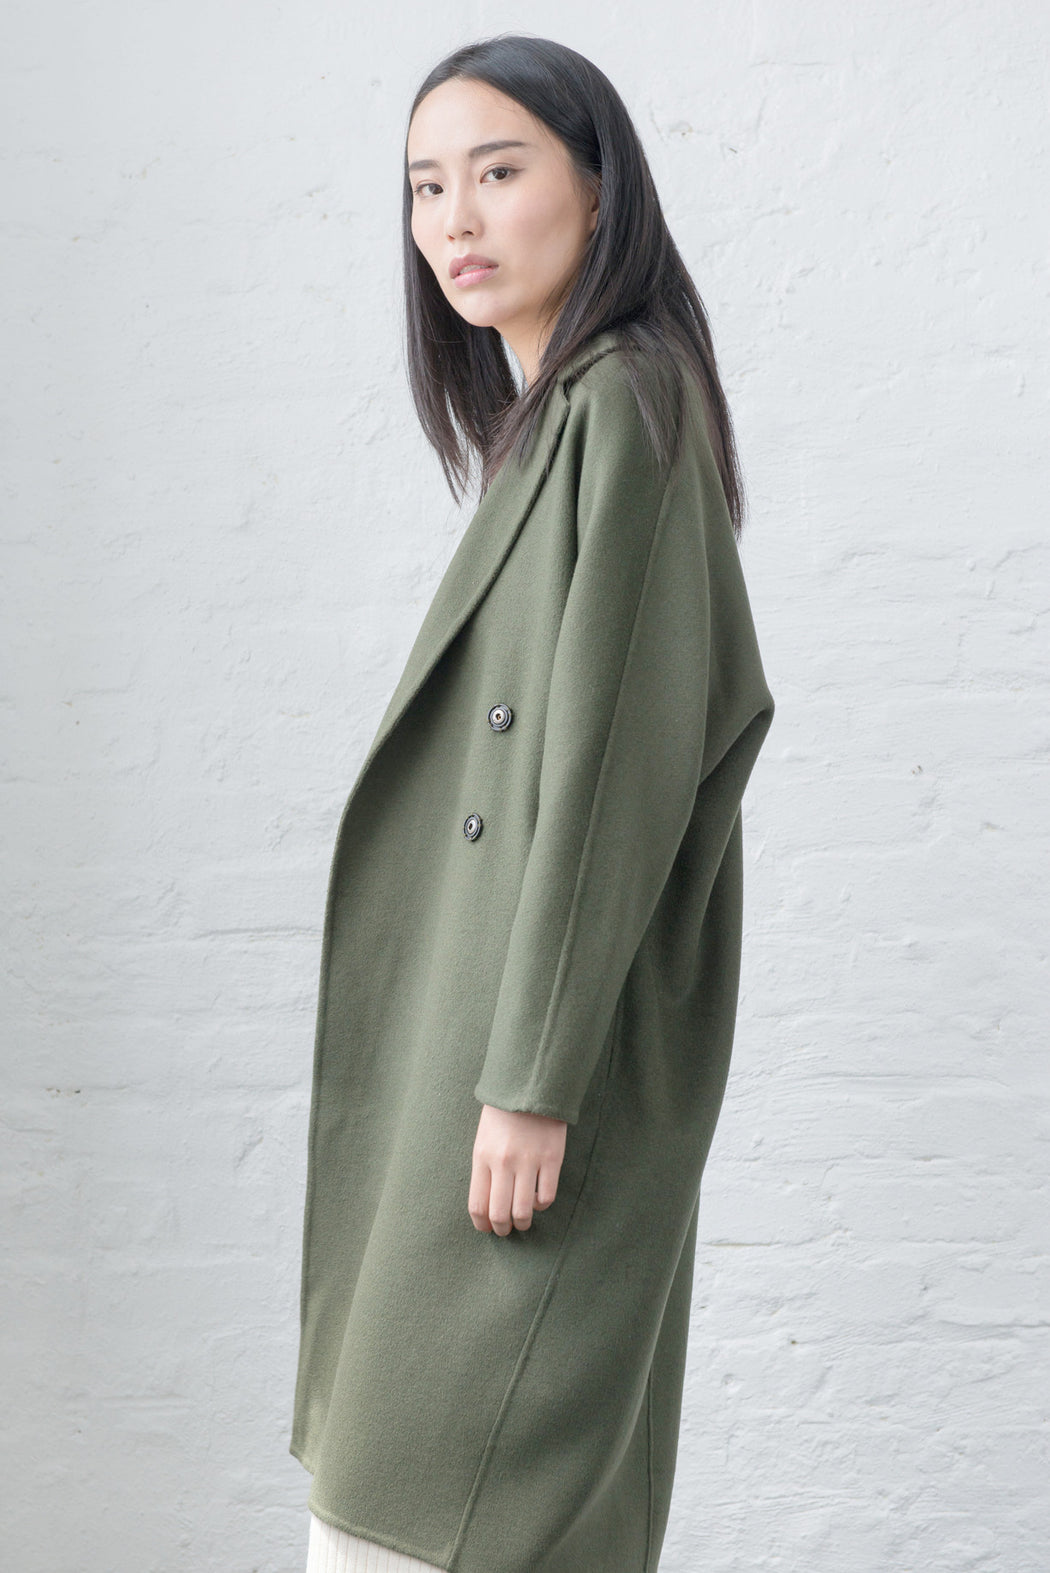 Womens outerwear JL011 Olive green cocoon coat — Mute by JL